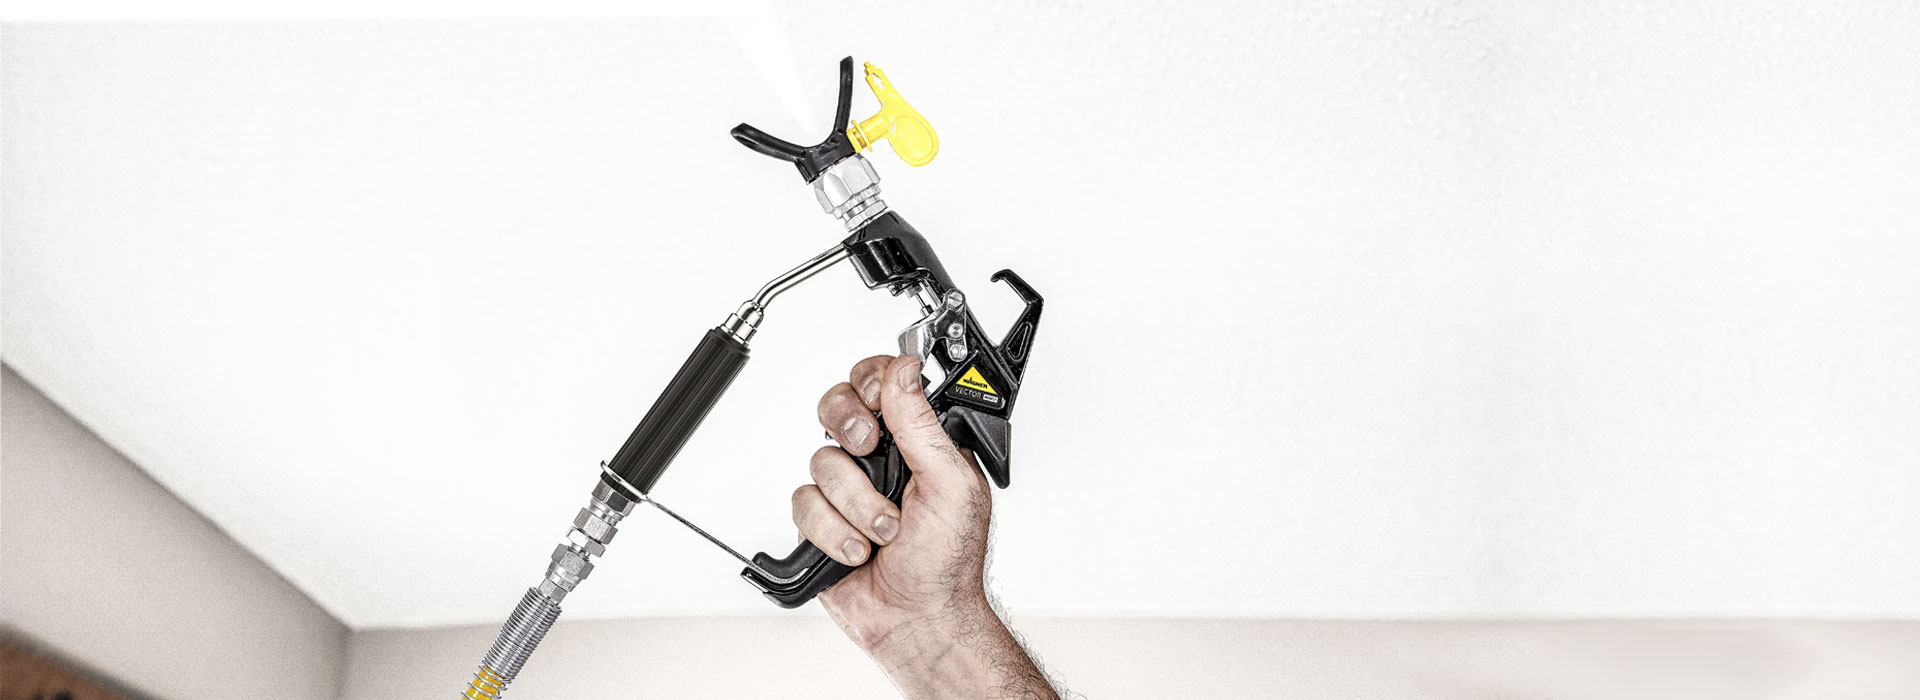 Airless paint sprayer for contractors: how it works and advantages